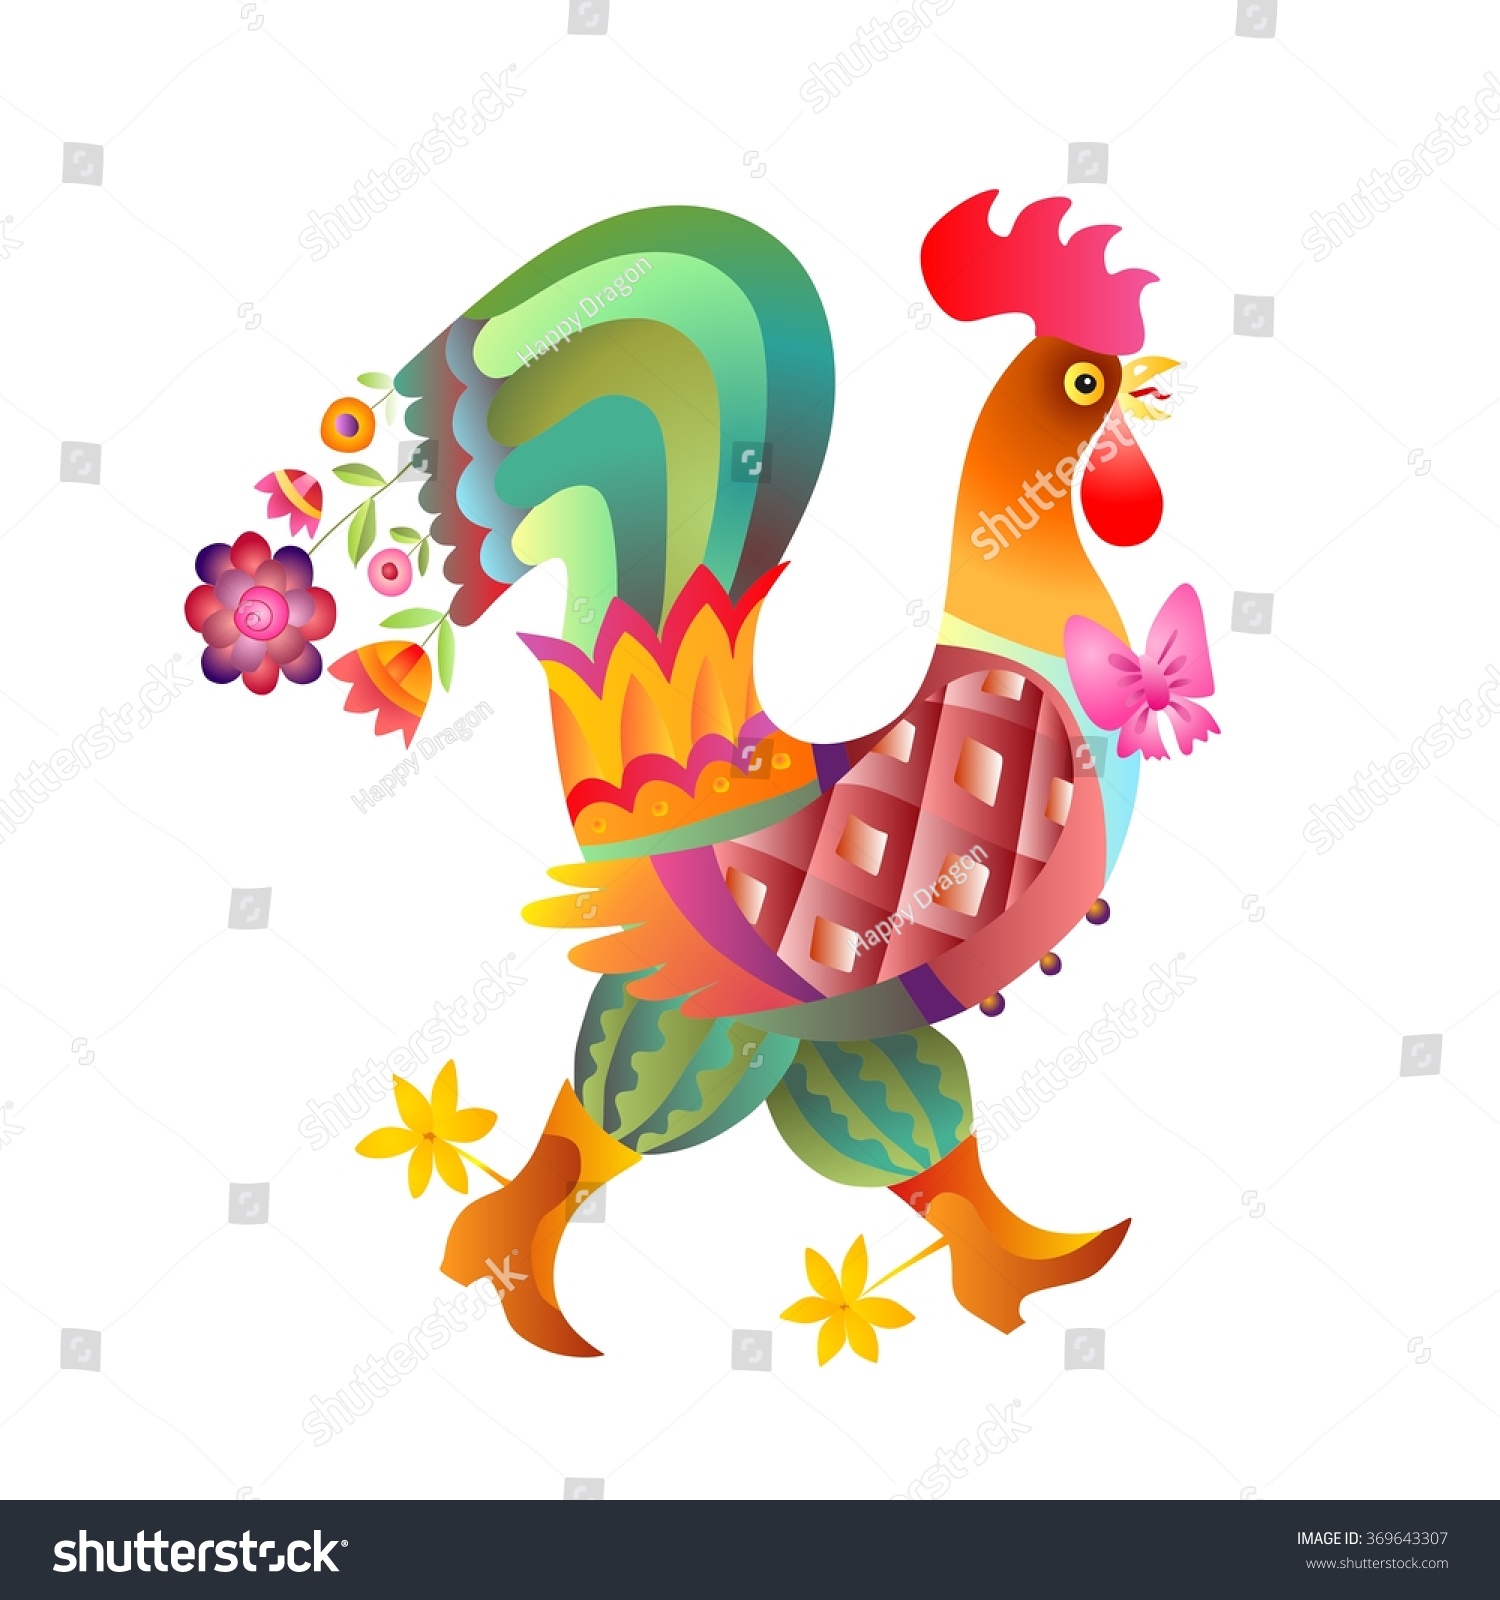 http://image.shutterstock.com/z/stock-vector-fairy-rooster-with-bow-on-white-background-chinese-symbol-of-year-vector-illustration-369643307.jpg